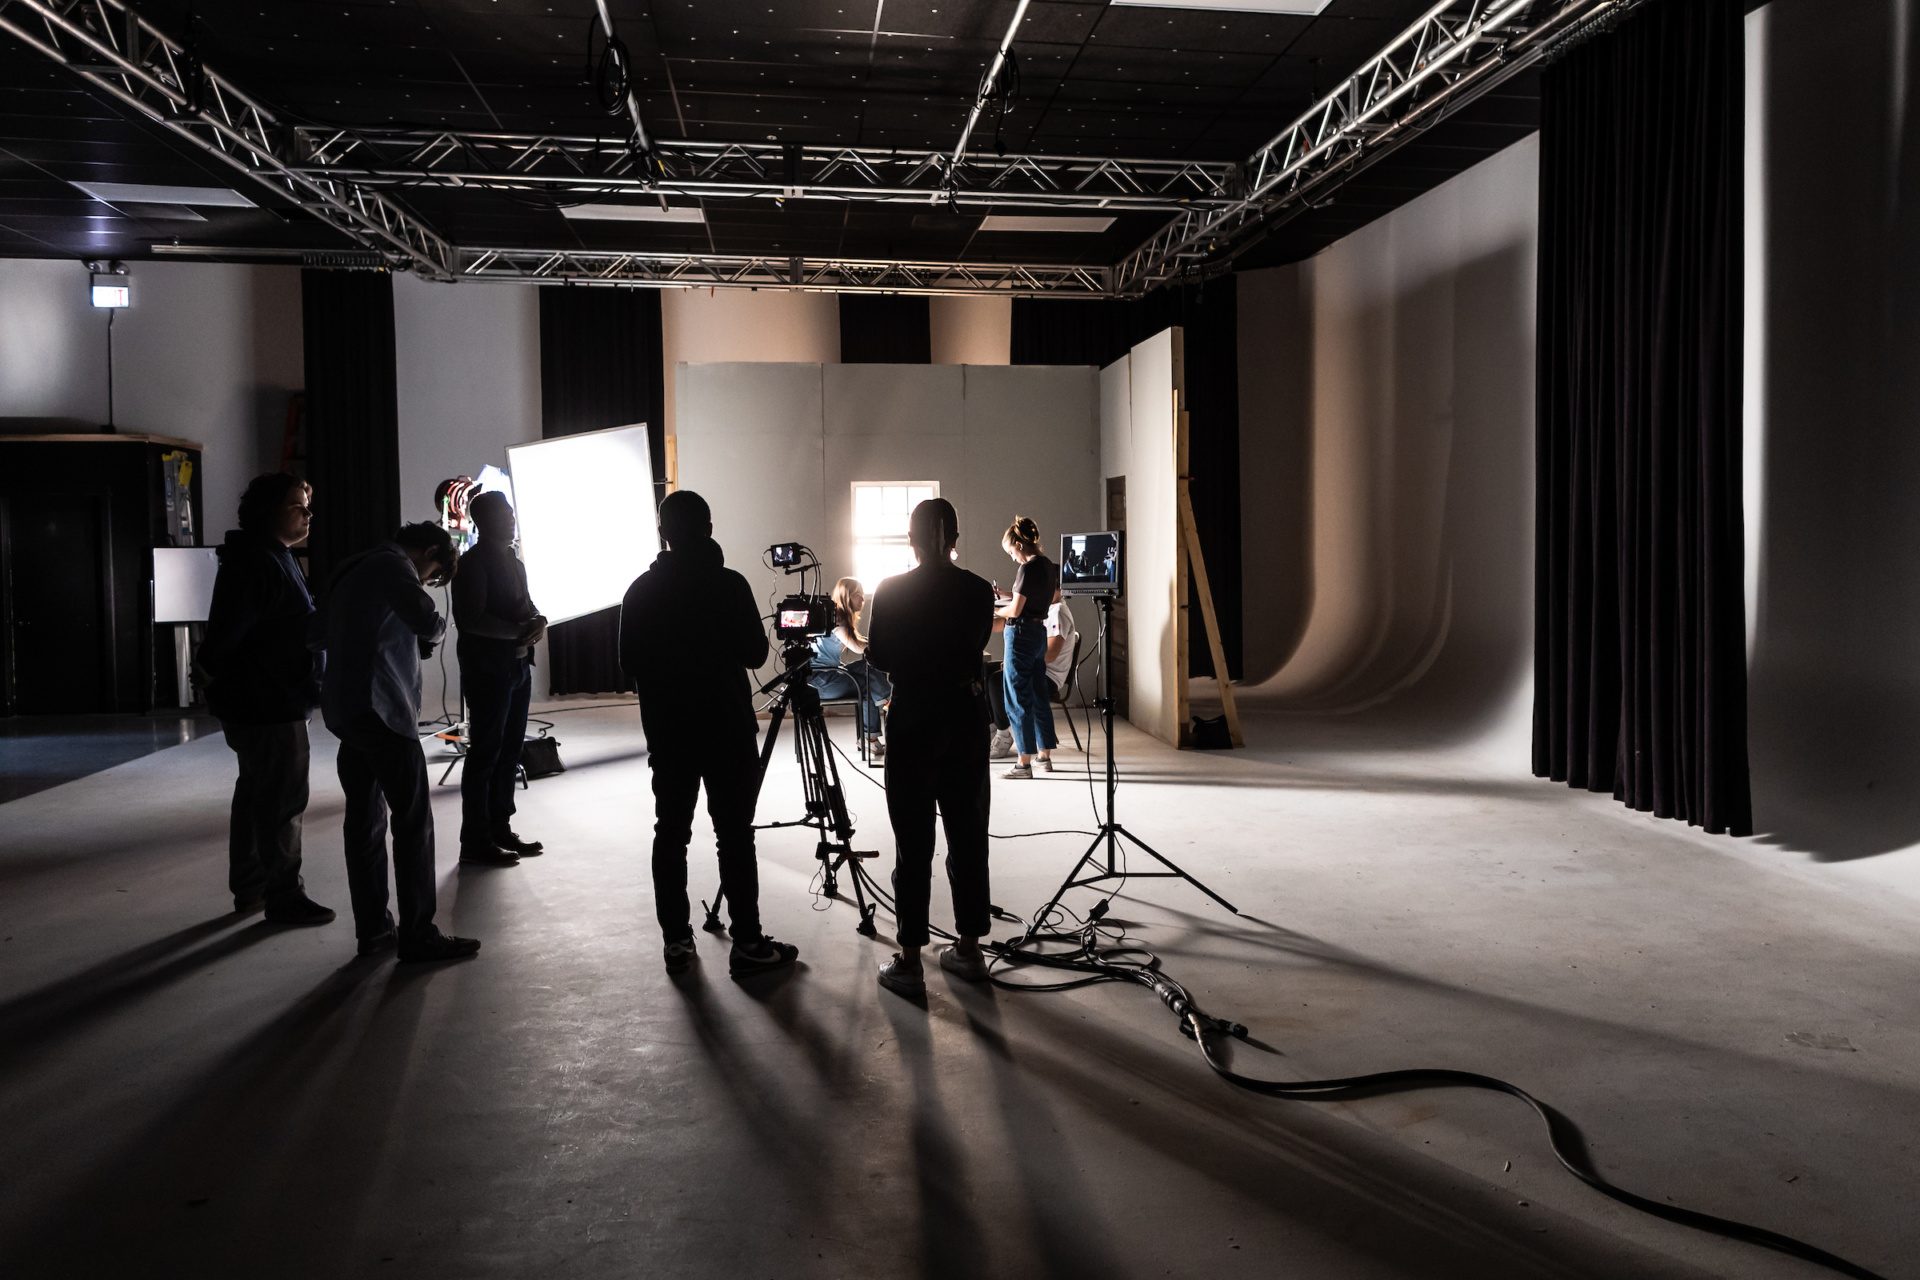 Professor working with students showing them lighting techniques in a film studio